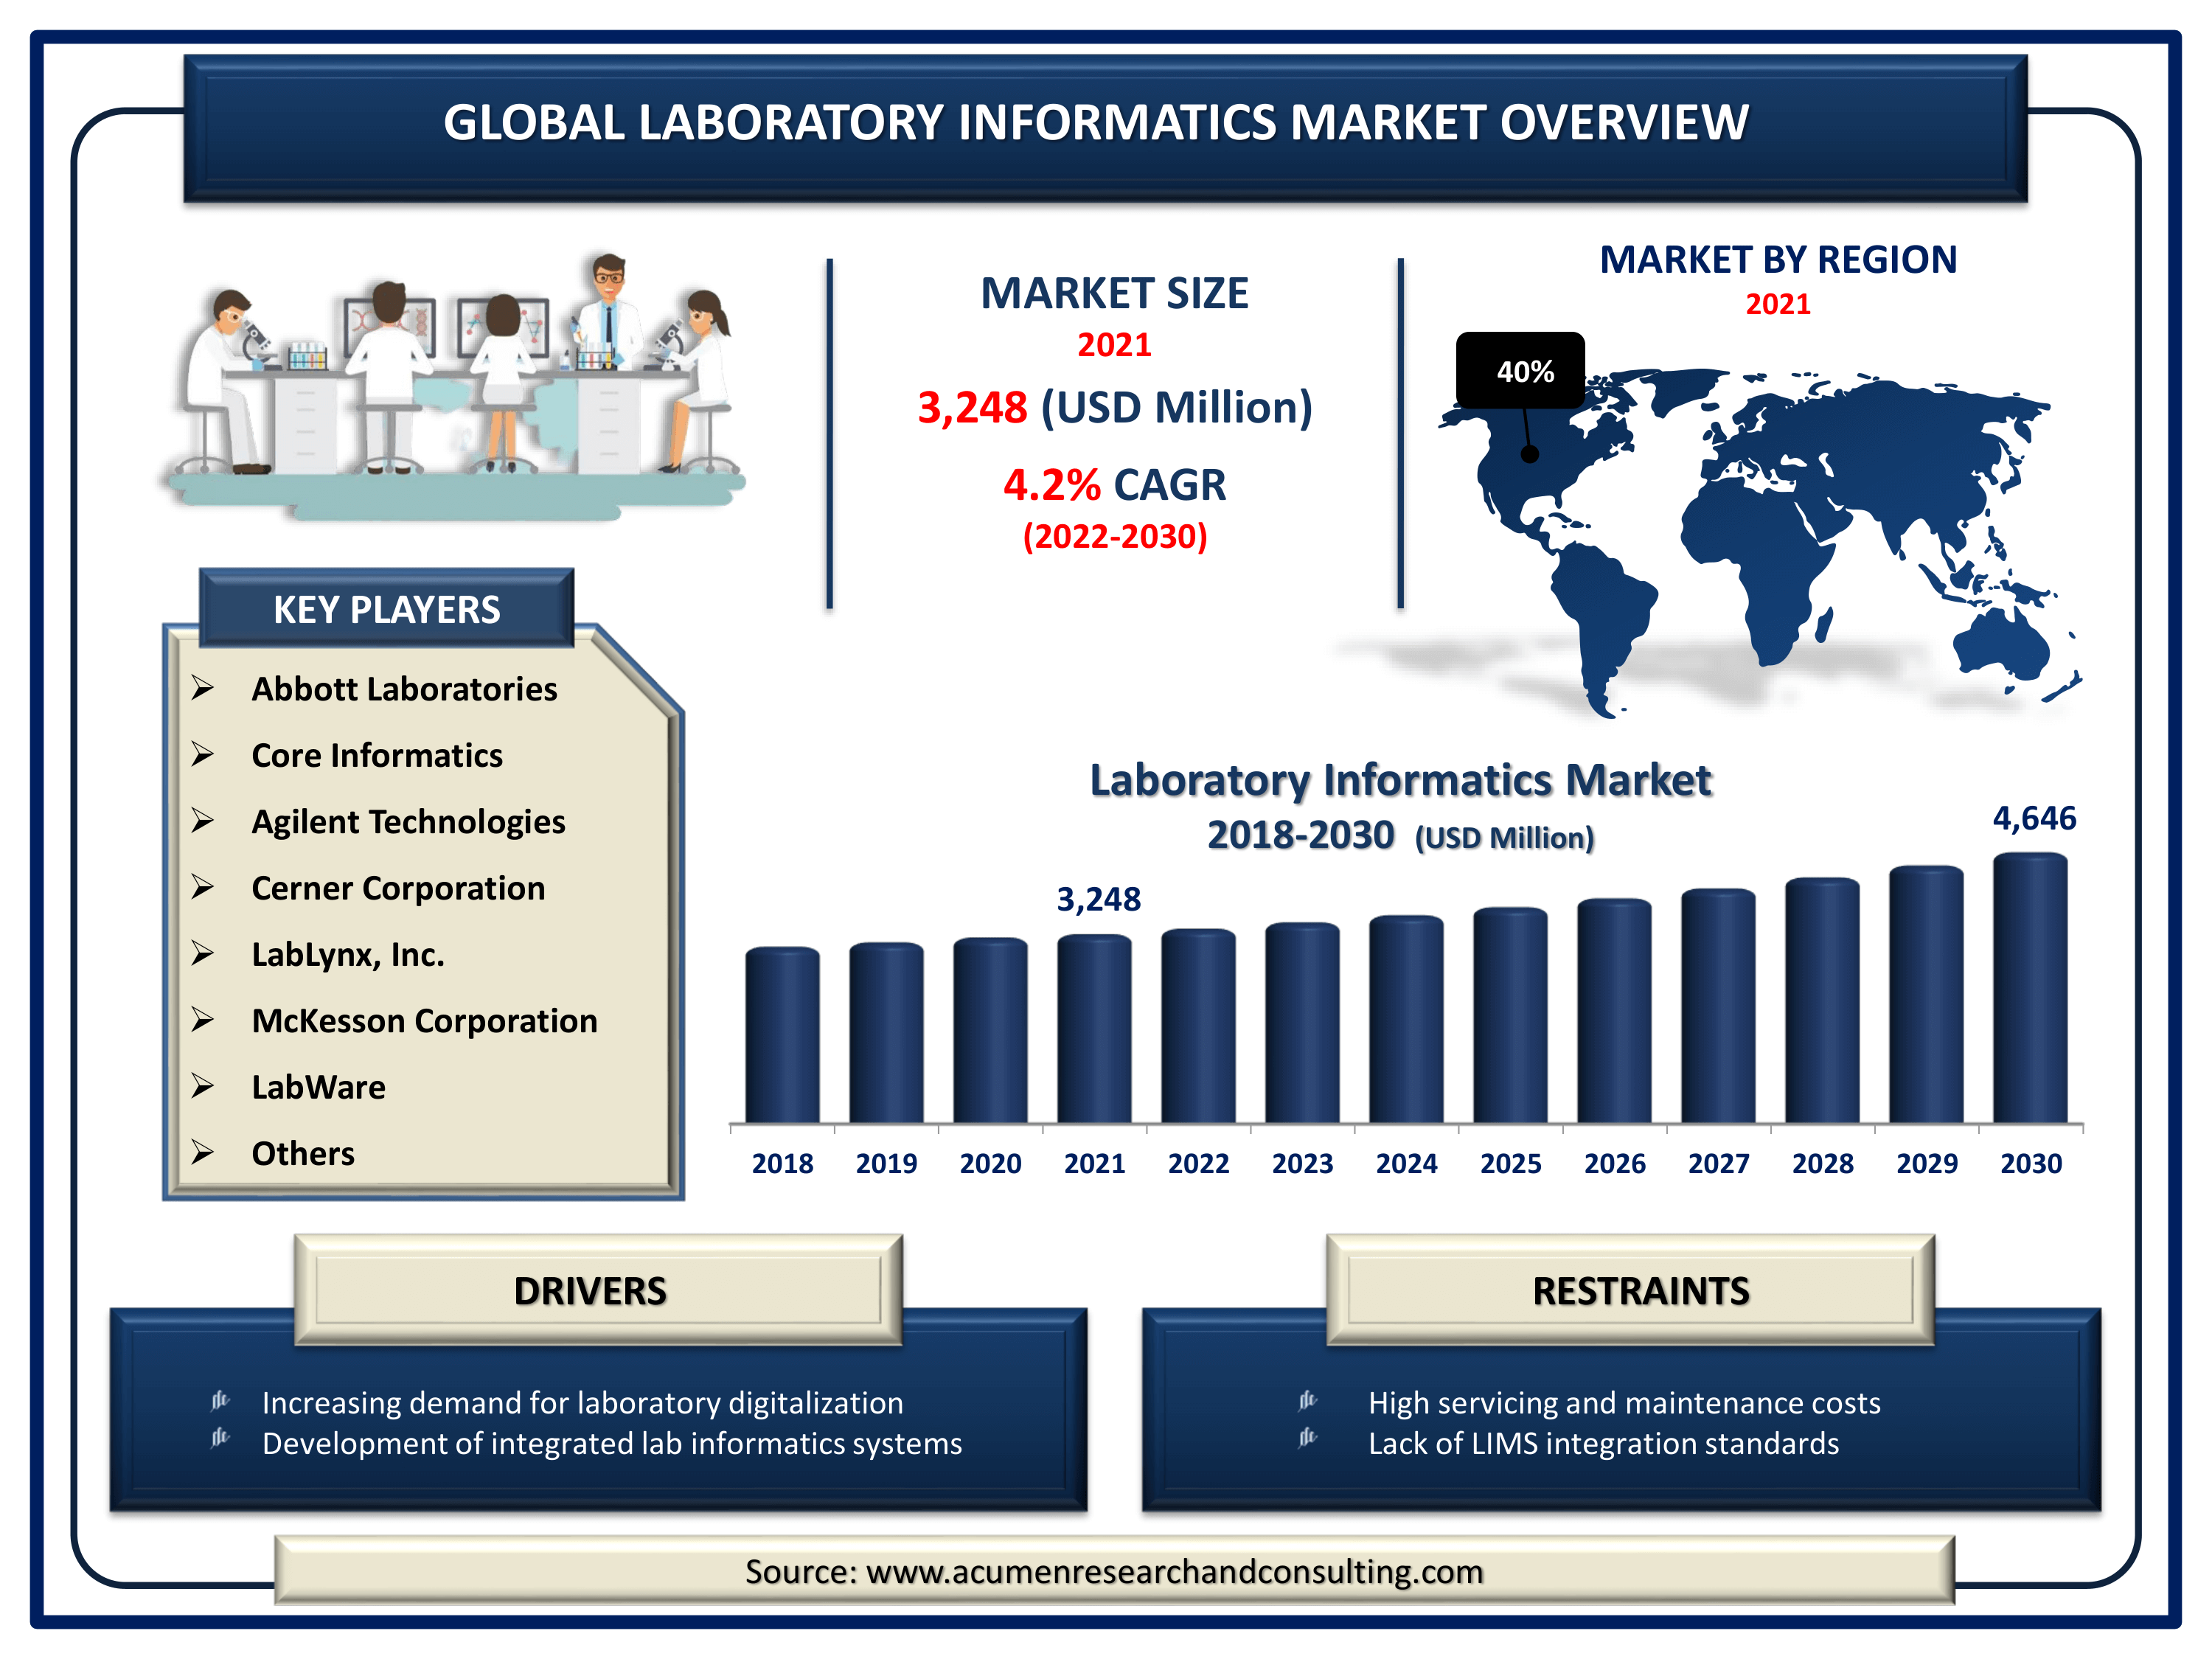 Global laboratory informatics market revenue intended to gain USD 4,646 million by 2030 with a CAGR of 4.2% from 2022 to 2030